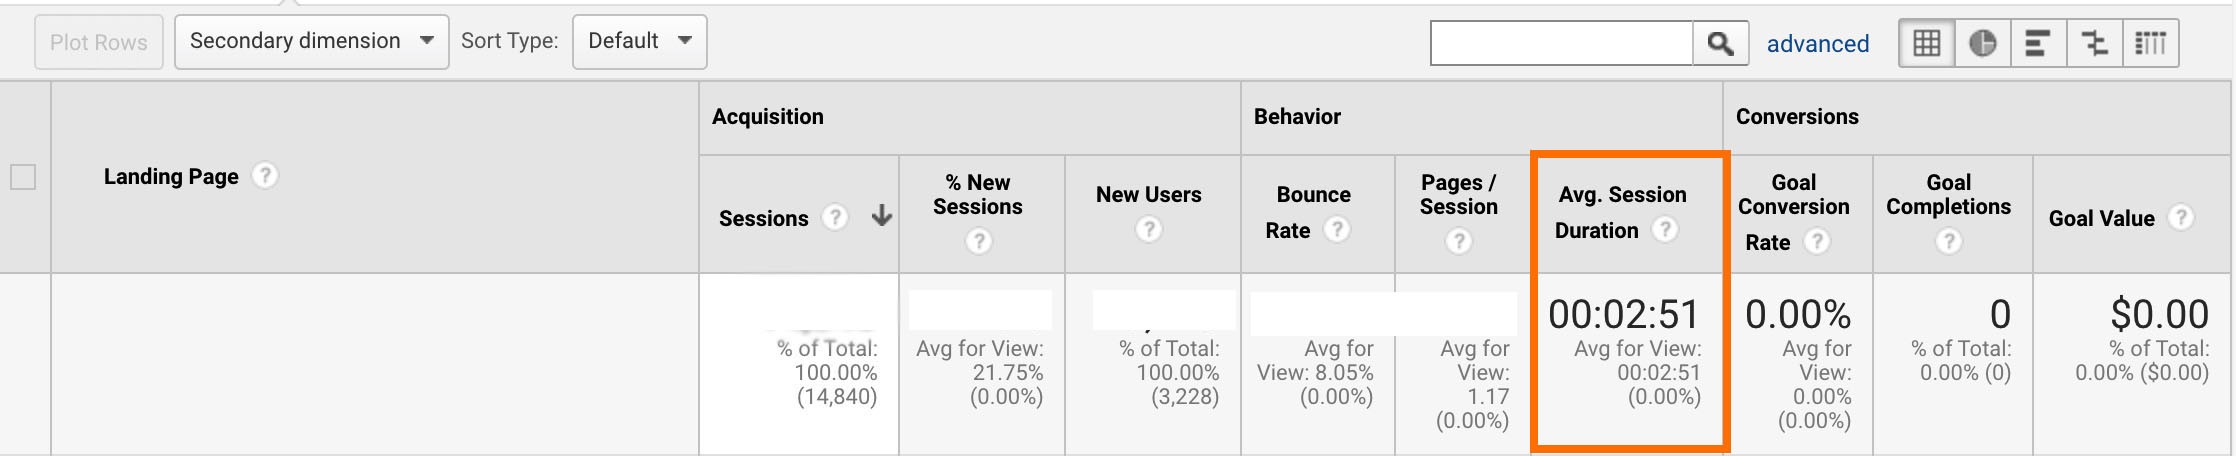 avg session duration for individual landing pages